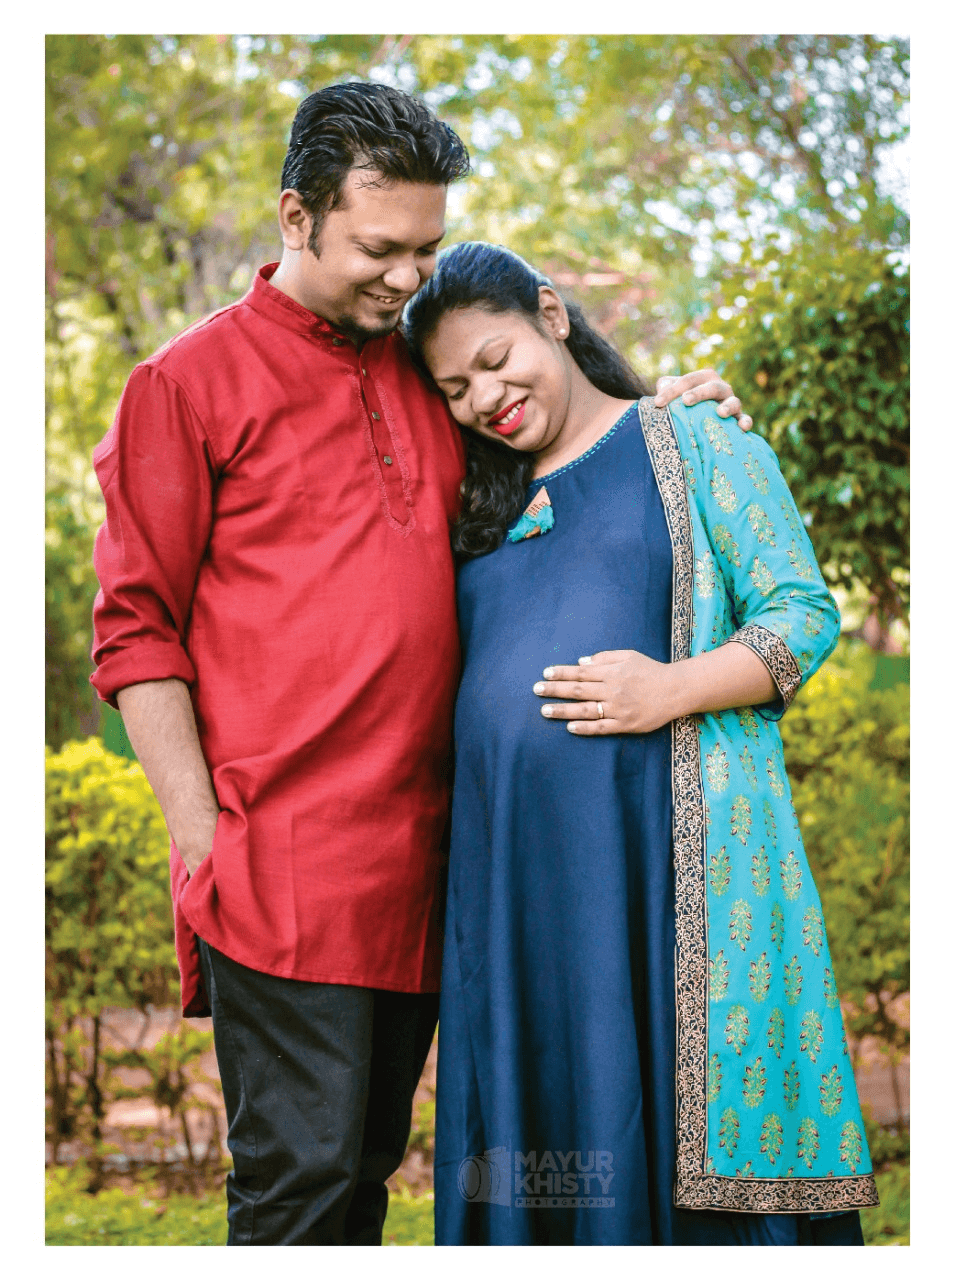 Pregnant wedding Photographer | Maternity and Newborn Photographer | editorial Maternity shoot